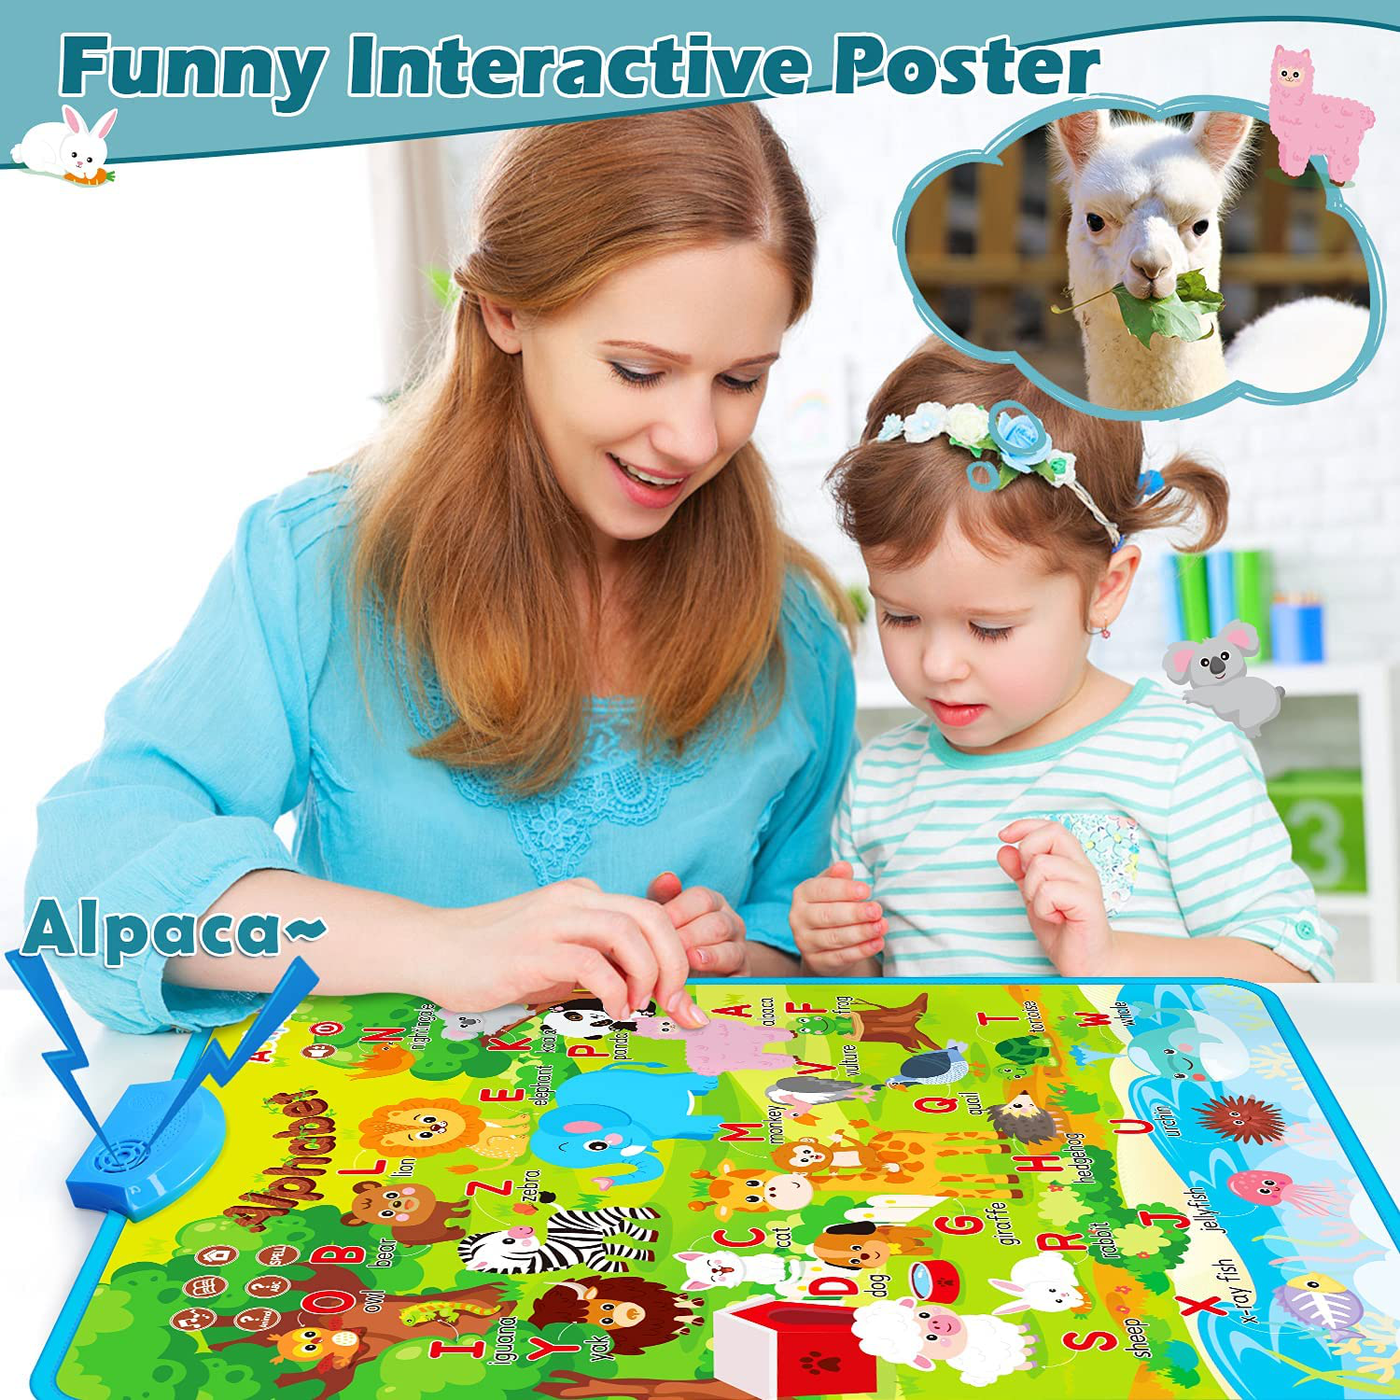 aotipol Electronic Interactive Alphabet Wall Chart, Talking ABC & 123 & Piano Tone Poster, Educational Toys for 3 4 5 Year Old Boys Girls, Toddlers Kids Learning Toys